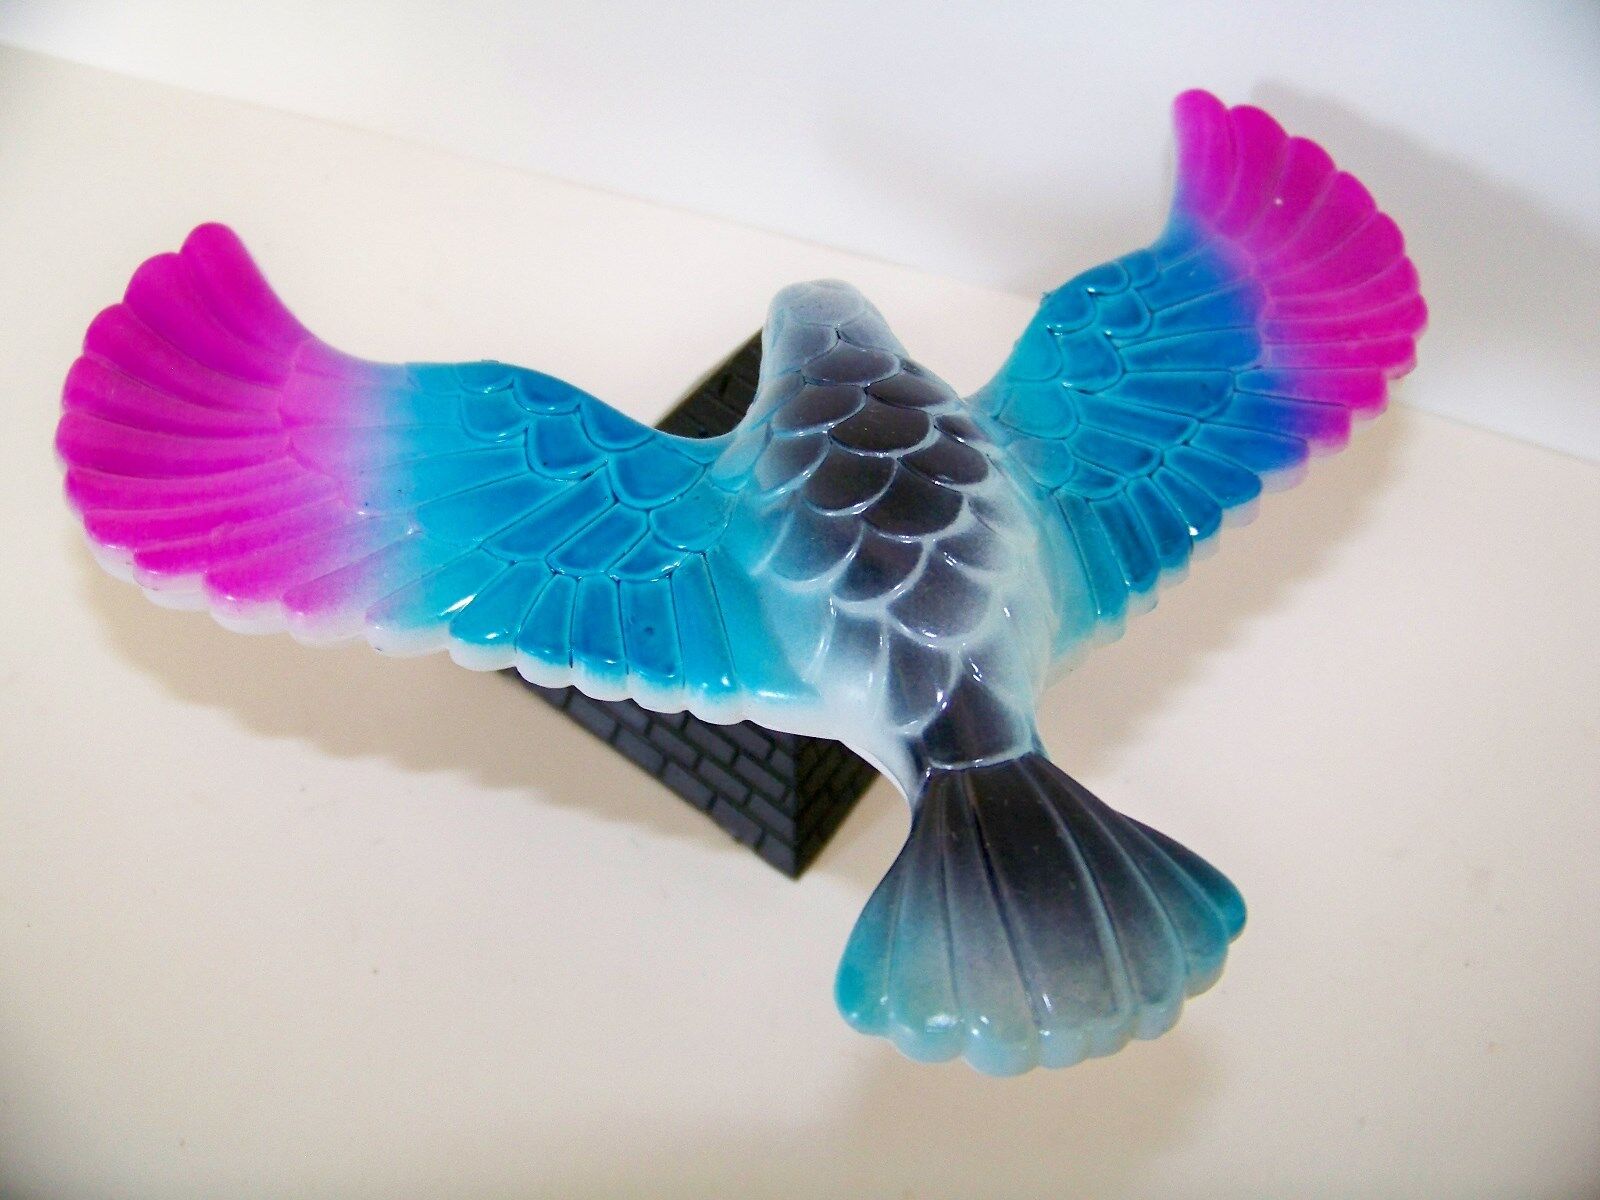 Balancing Bird 6" Wingspan With Pyramid Stand Magic Scientific 'colors Vary'